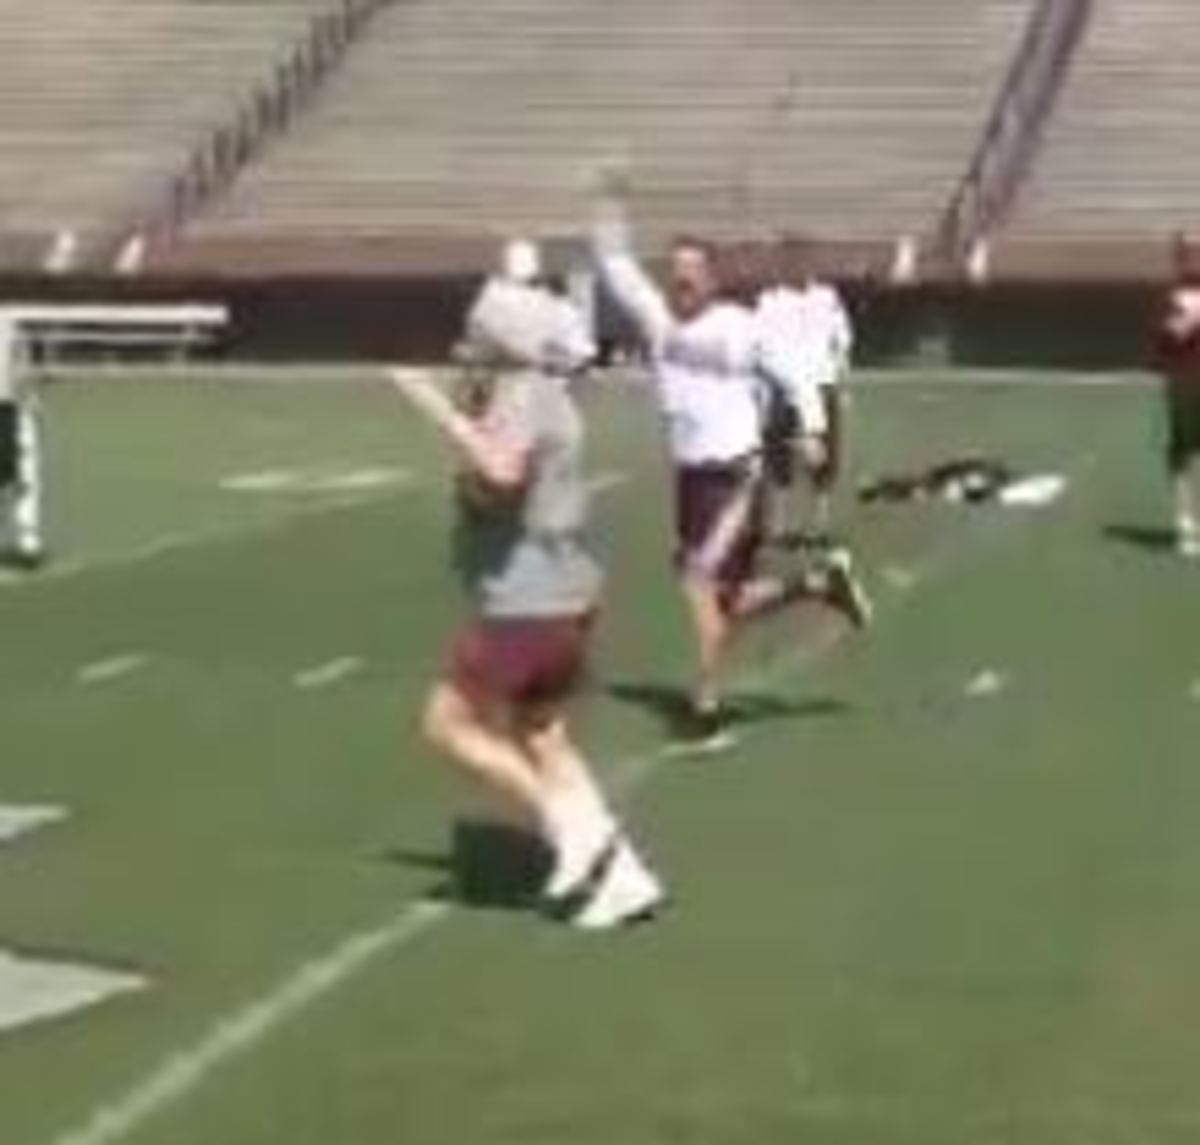 Mary, a 60+ year old Mississippi State fan, running the 40 yard dash.